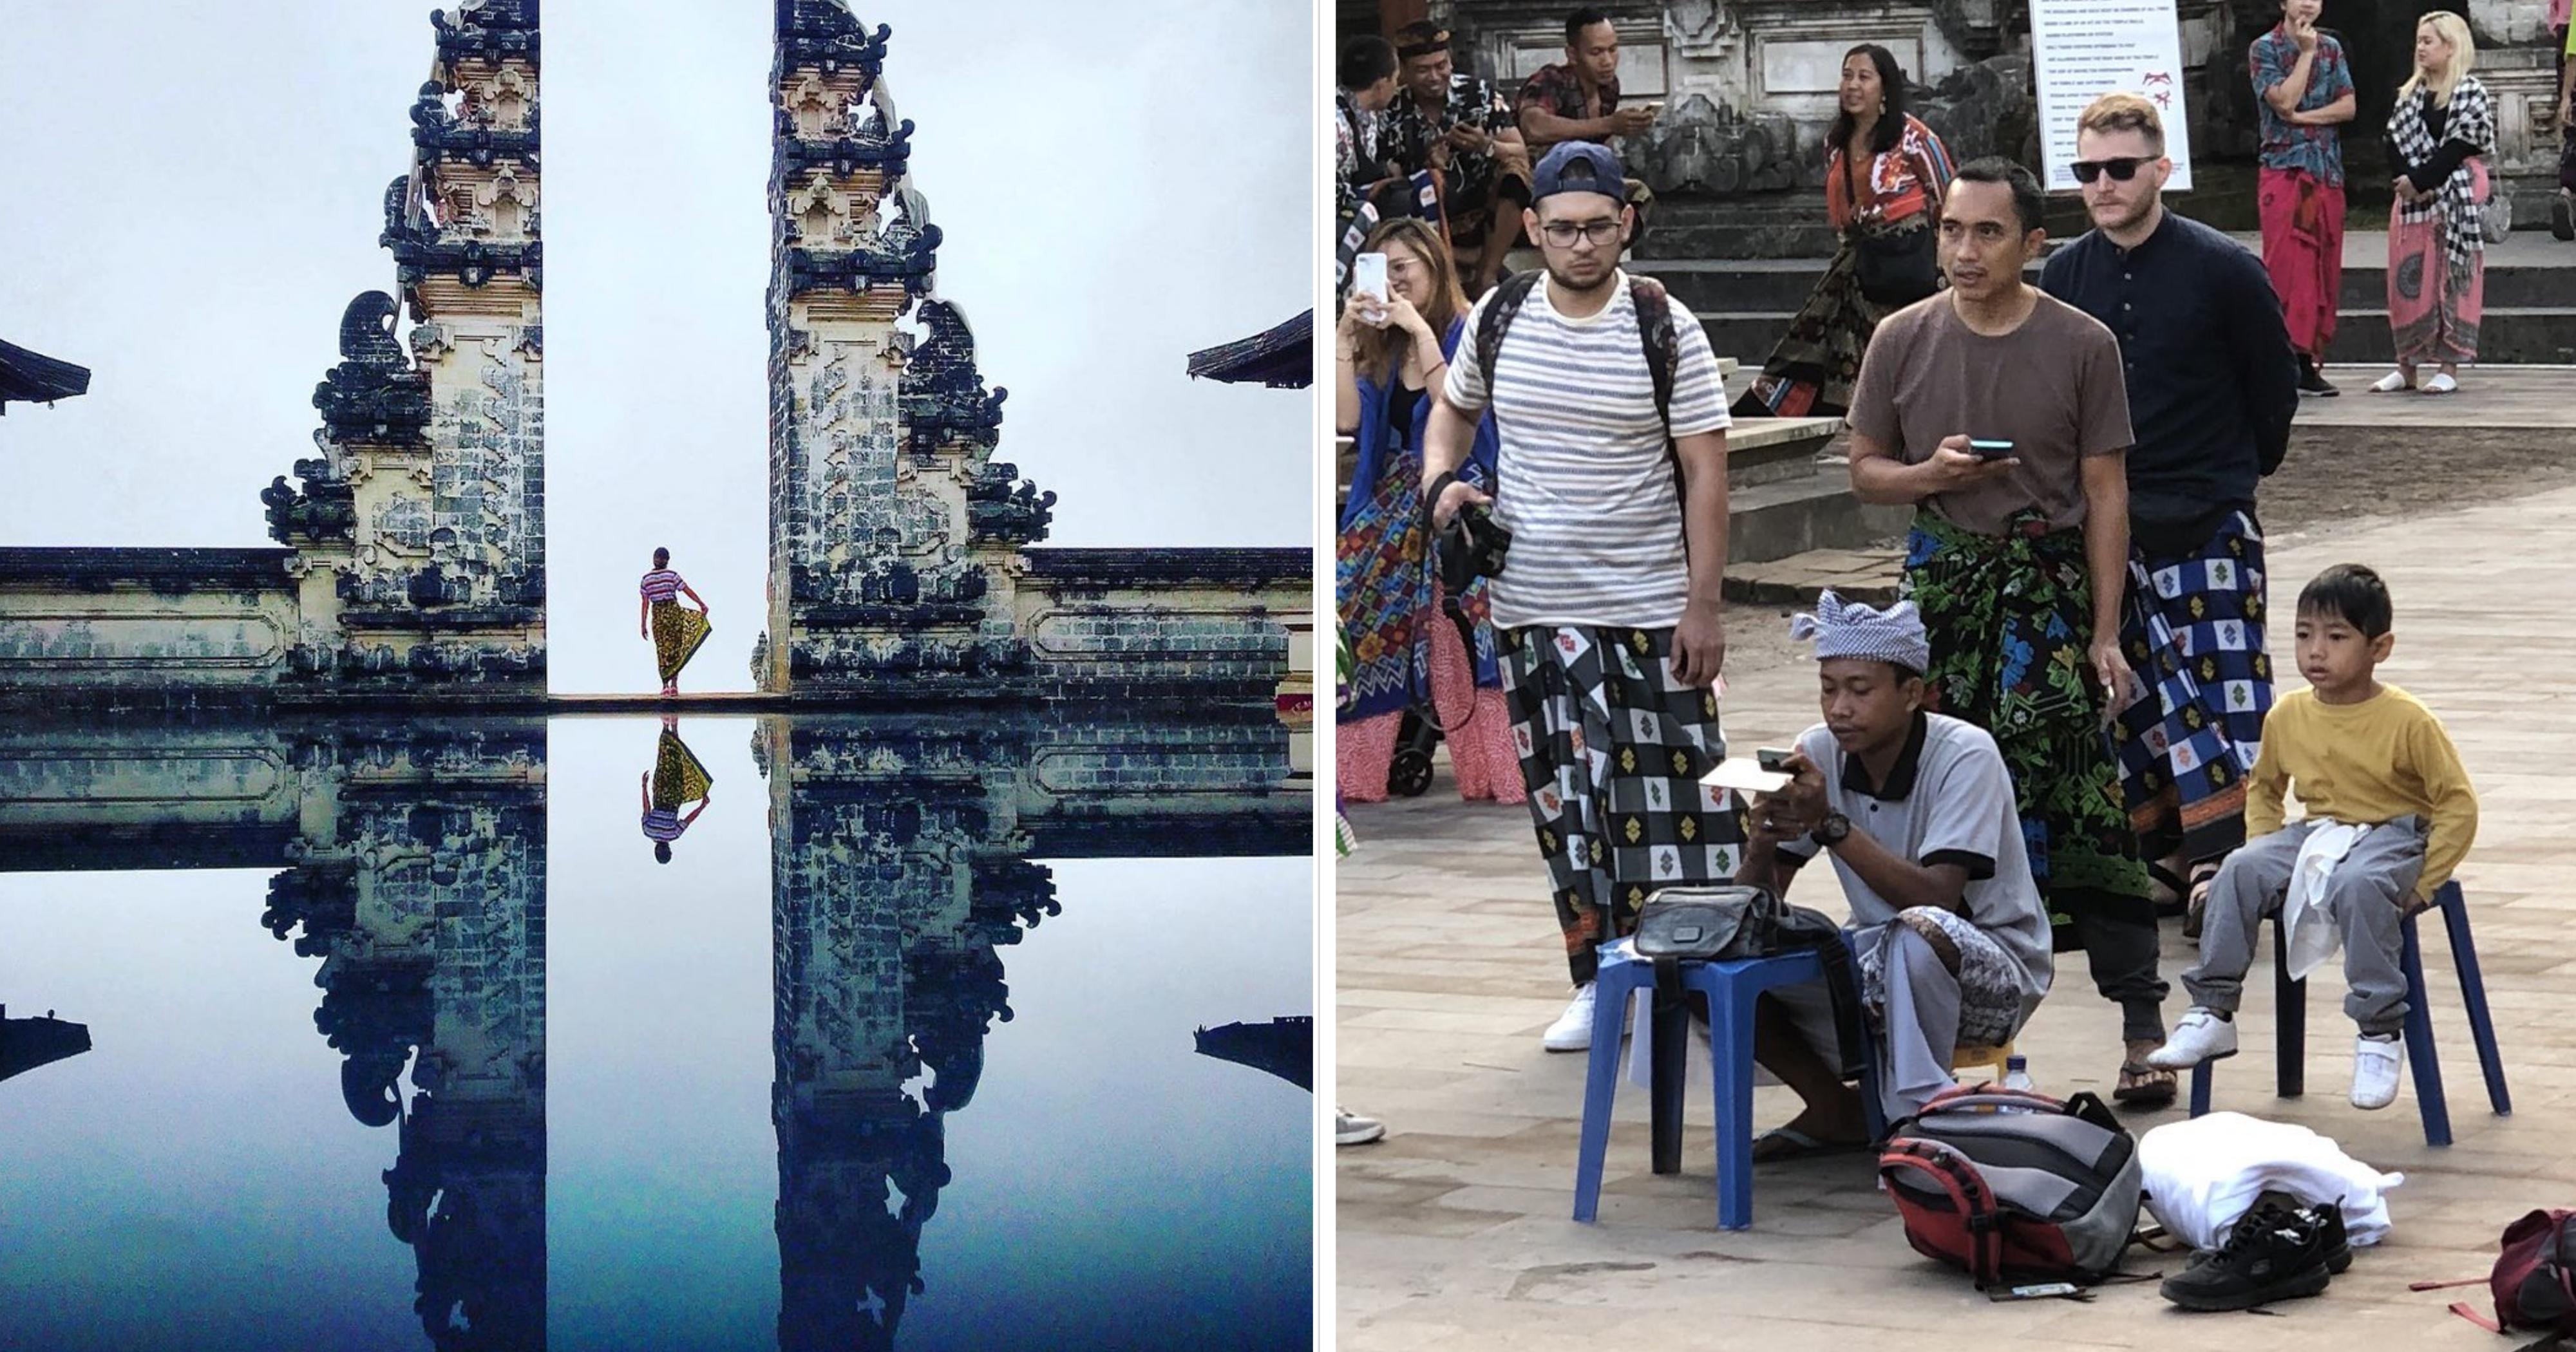 Popular Instagram Hotspot In Bali Gates Of Heaven Turns Out To Be Sheet Of Glass Visual Trickery Mothership Sg News From Singapore Asia And Around The World